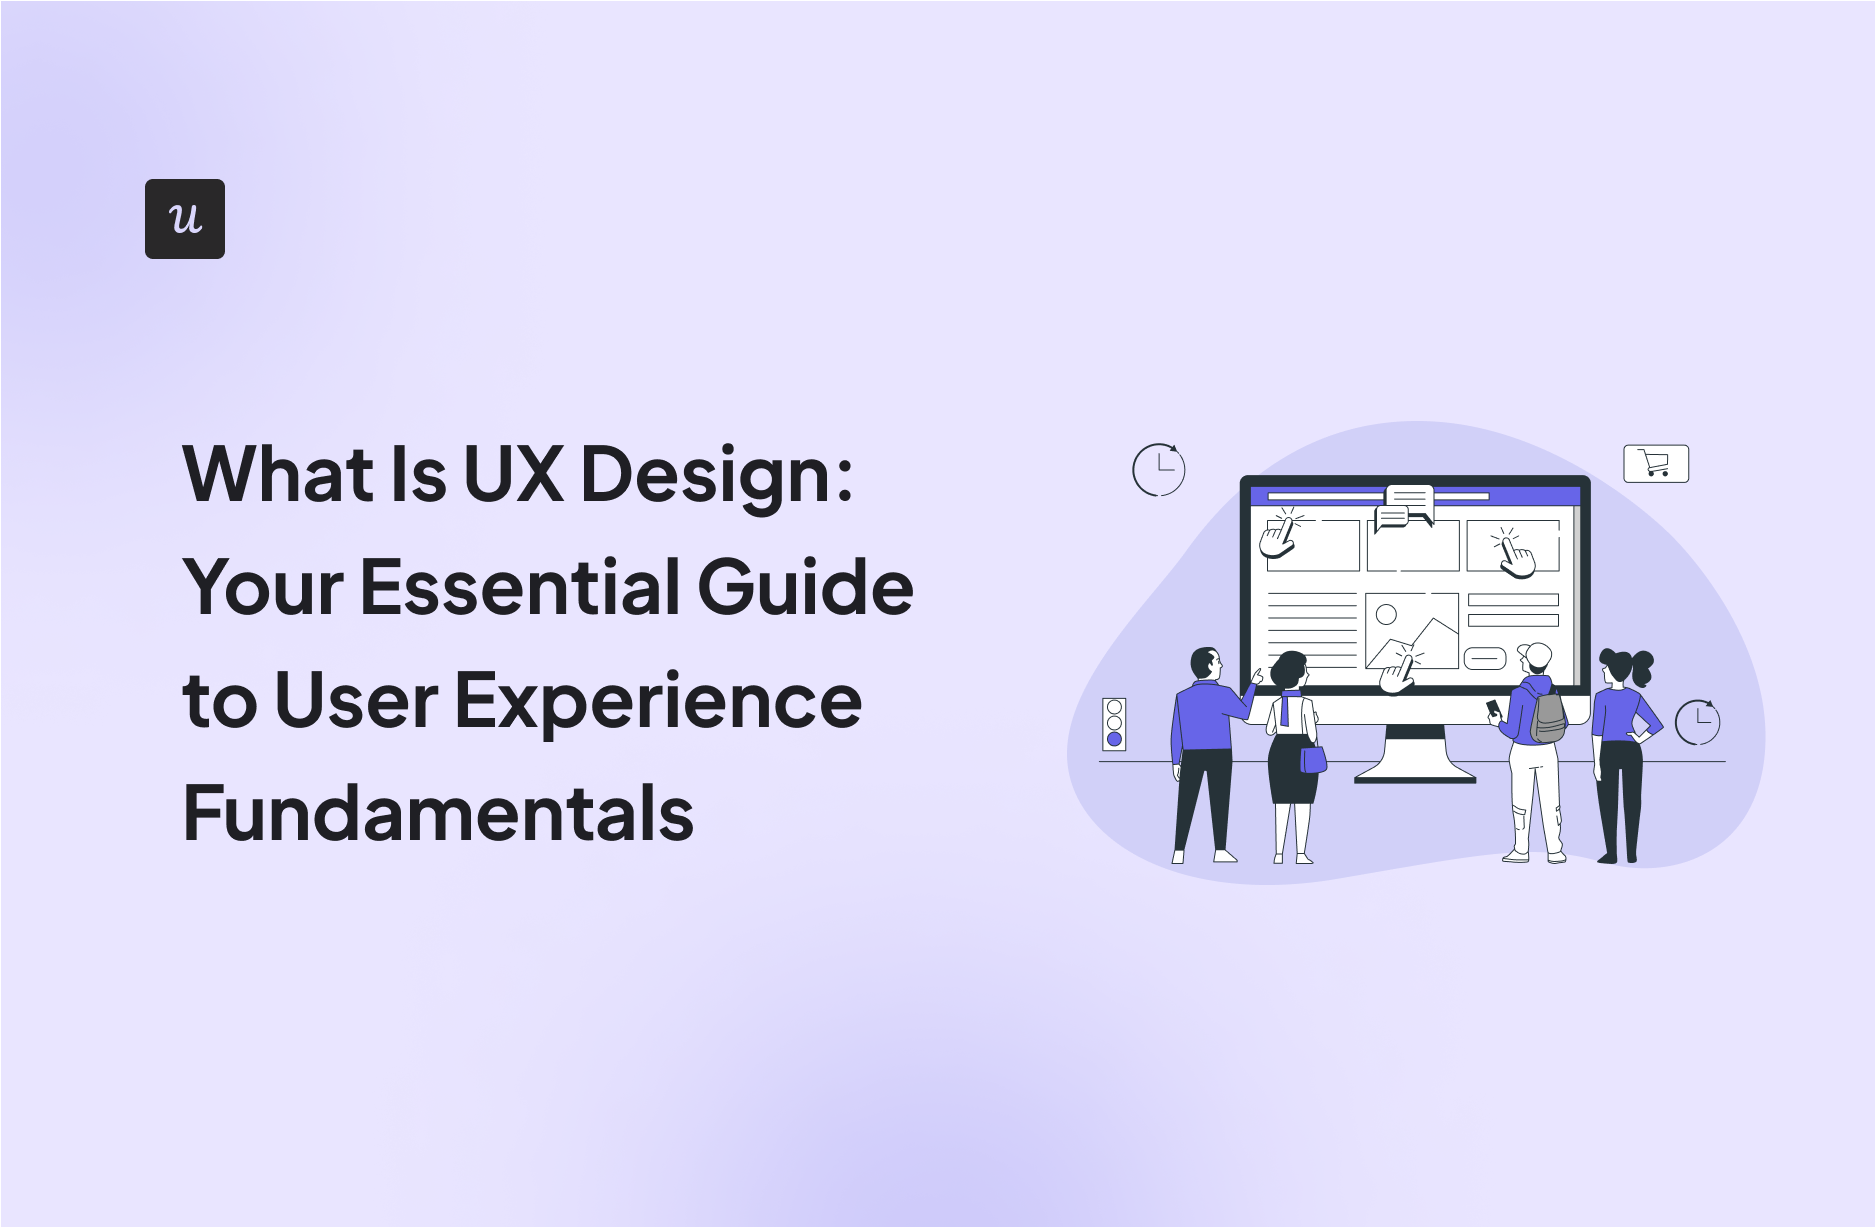 What Is UX Design: Your Essential Guide to User Experience Fundamentals